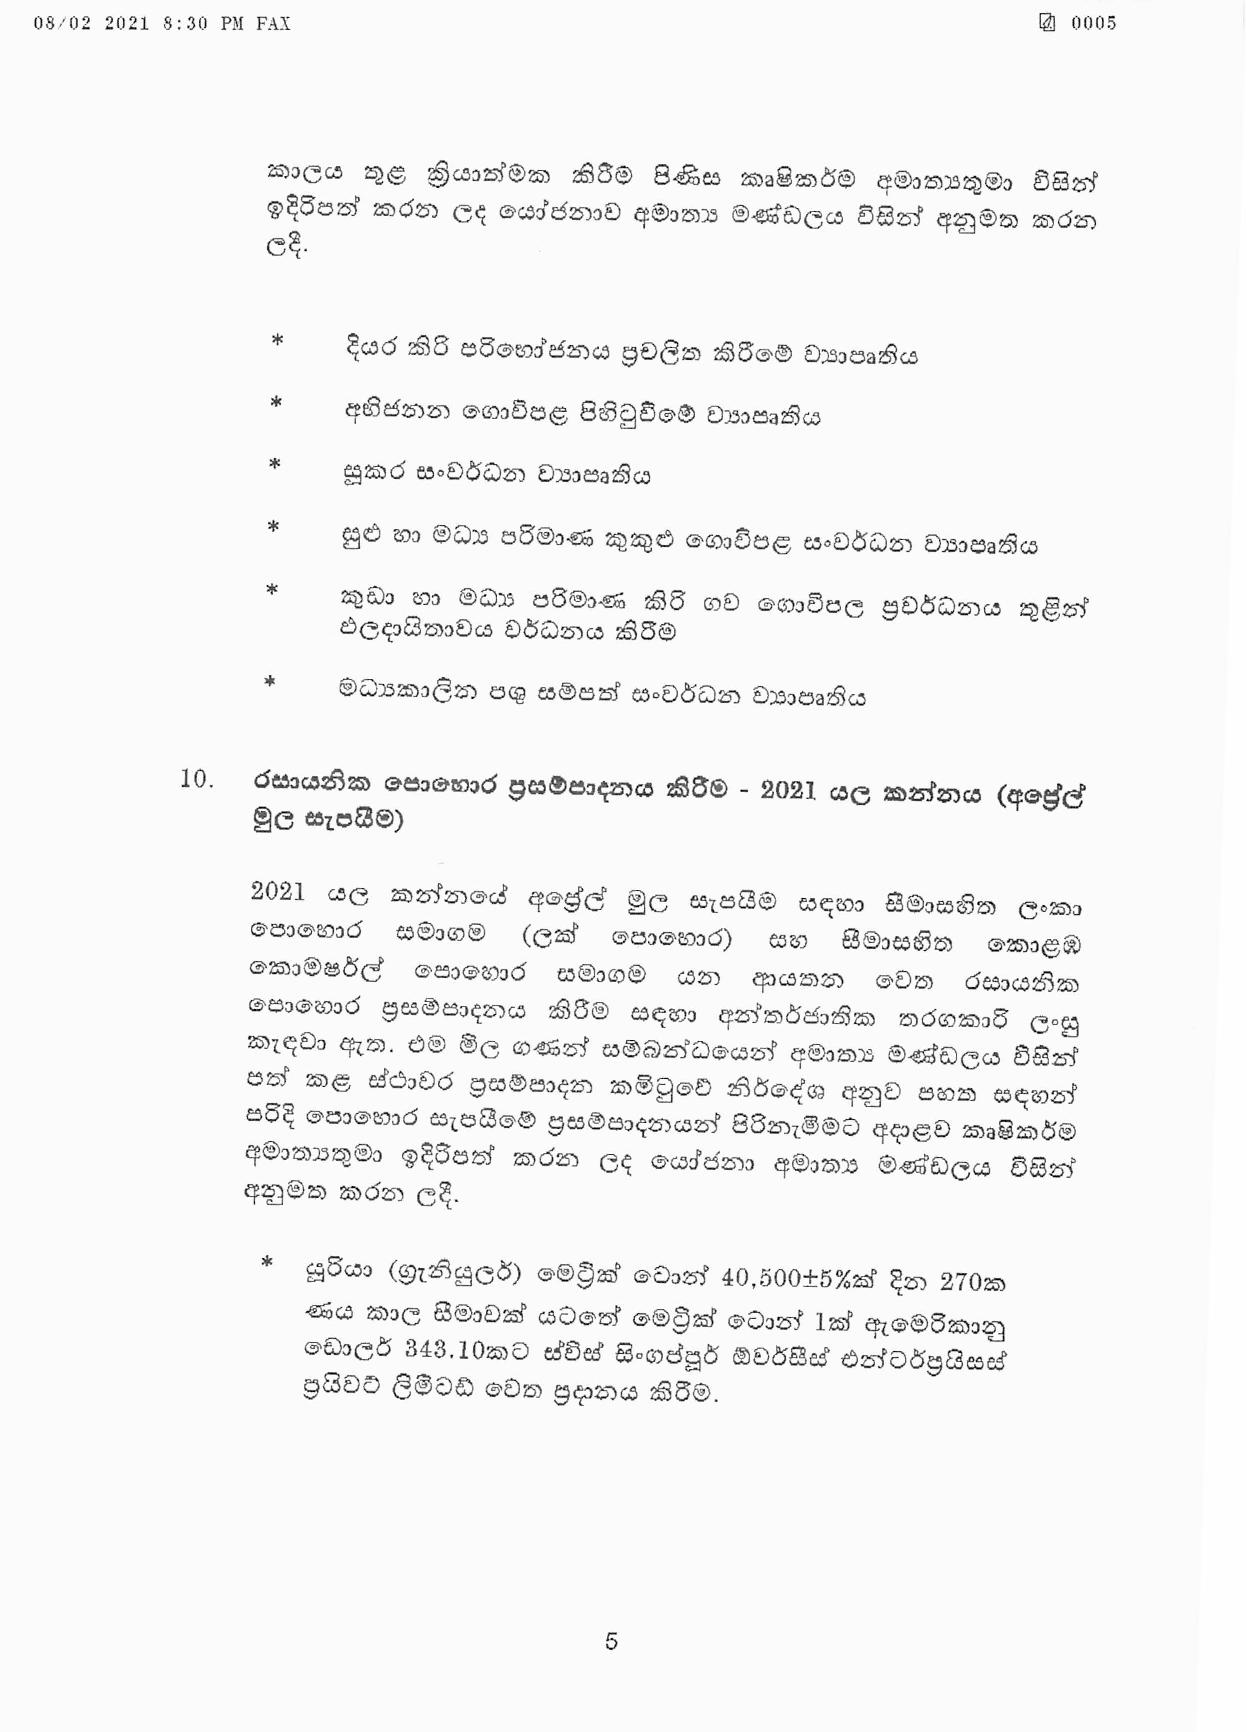 Cabinet Decision on 08.02.2021 page 005